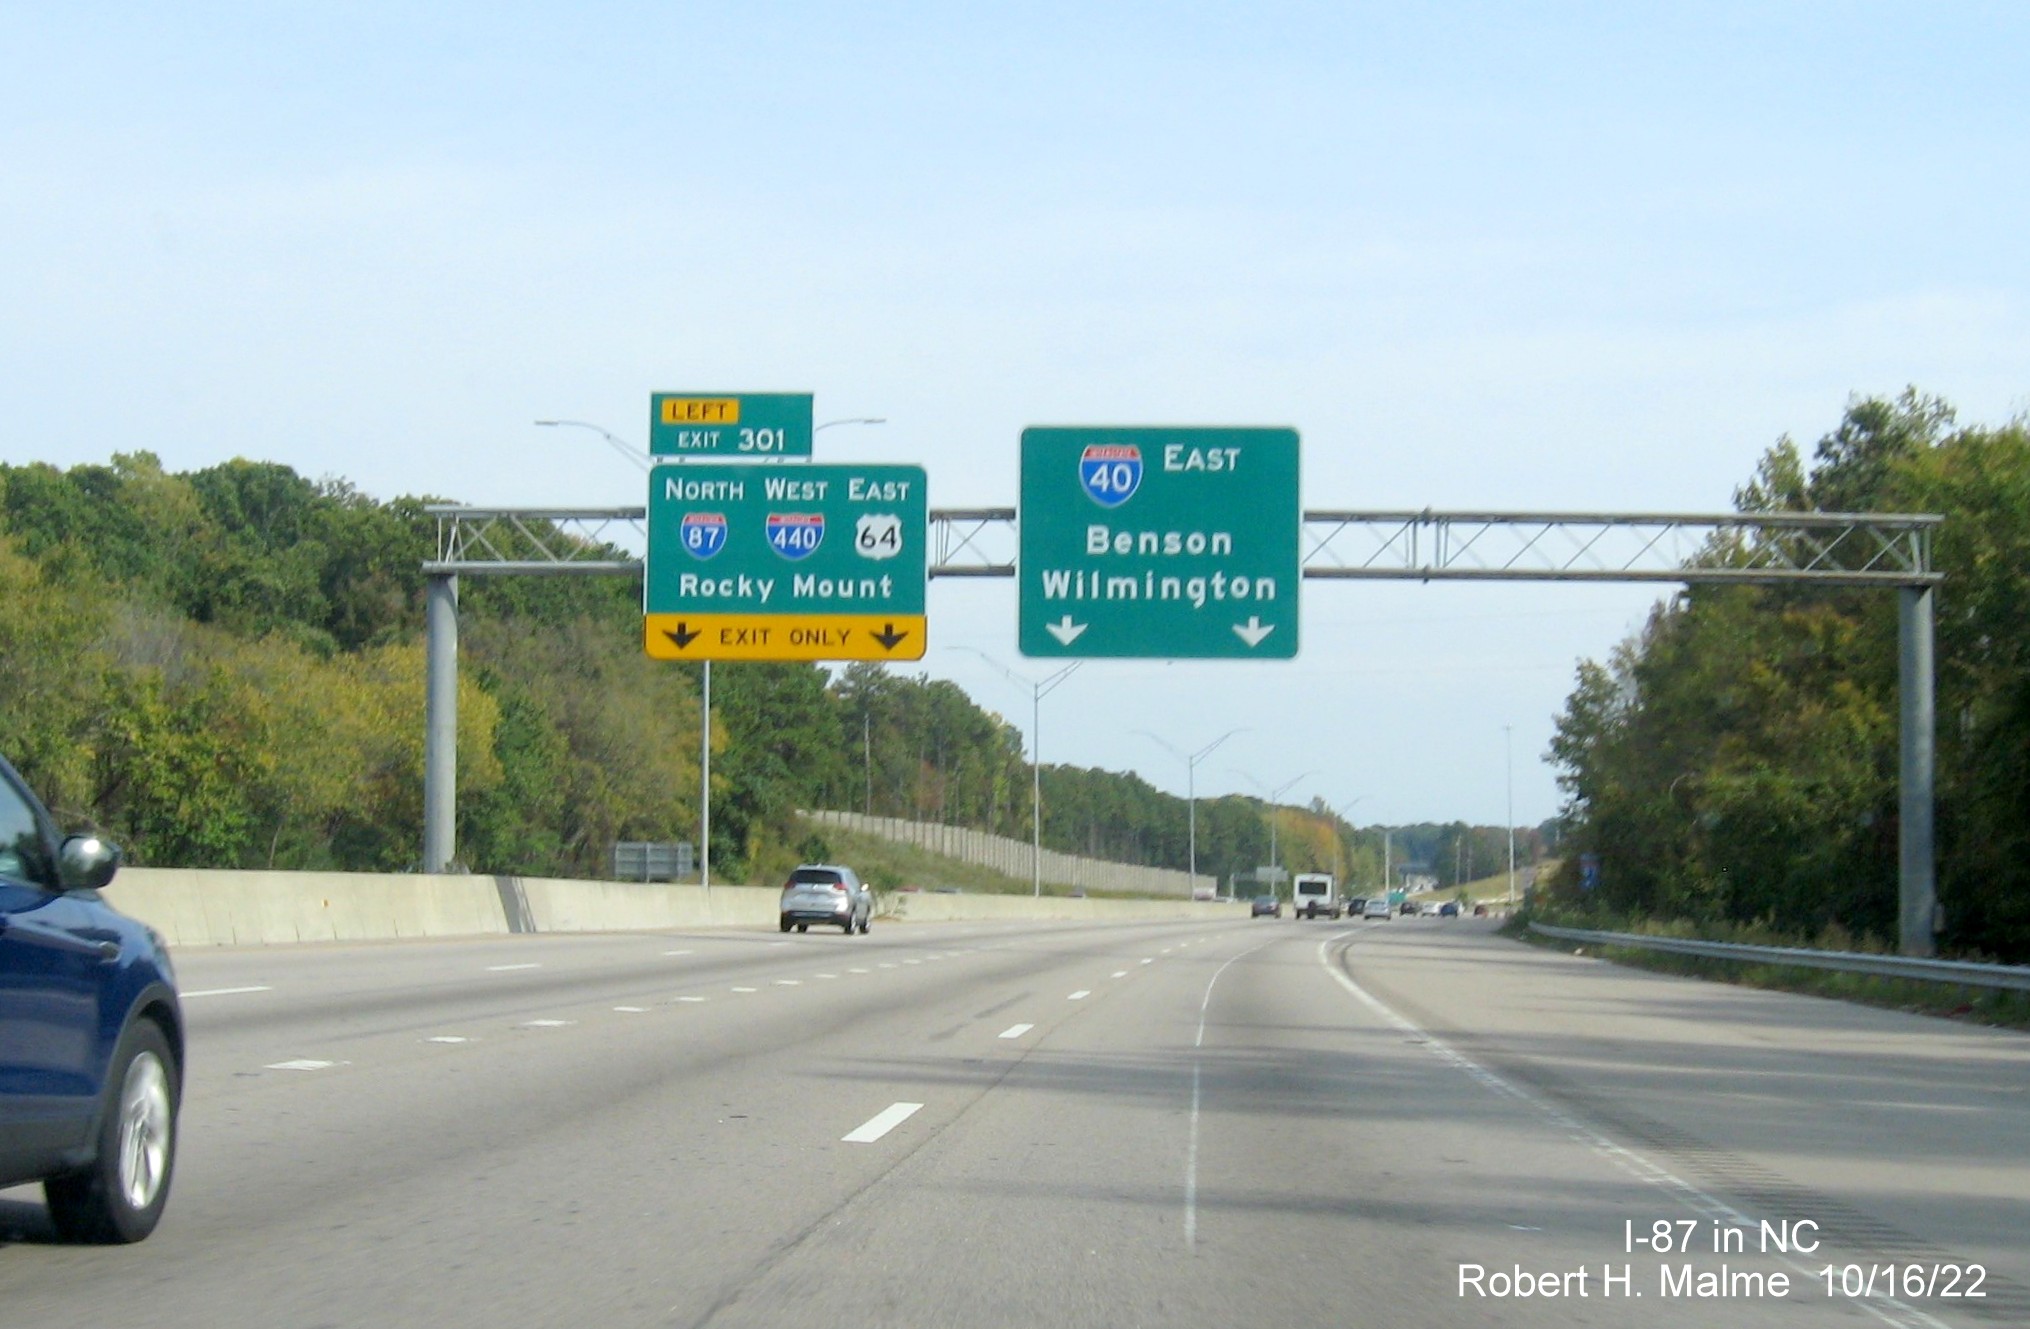 Image of 1 Mile advance overhead sign for I-87 North/I-440 West/US 64 East on I-40/US 64 East 
                                        in Raleigh, October 2022